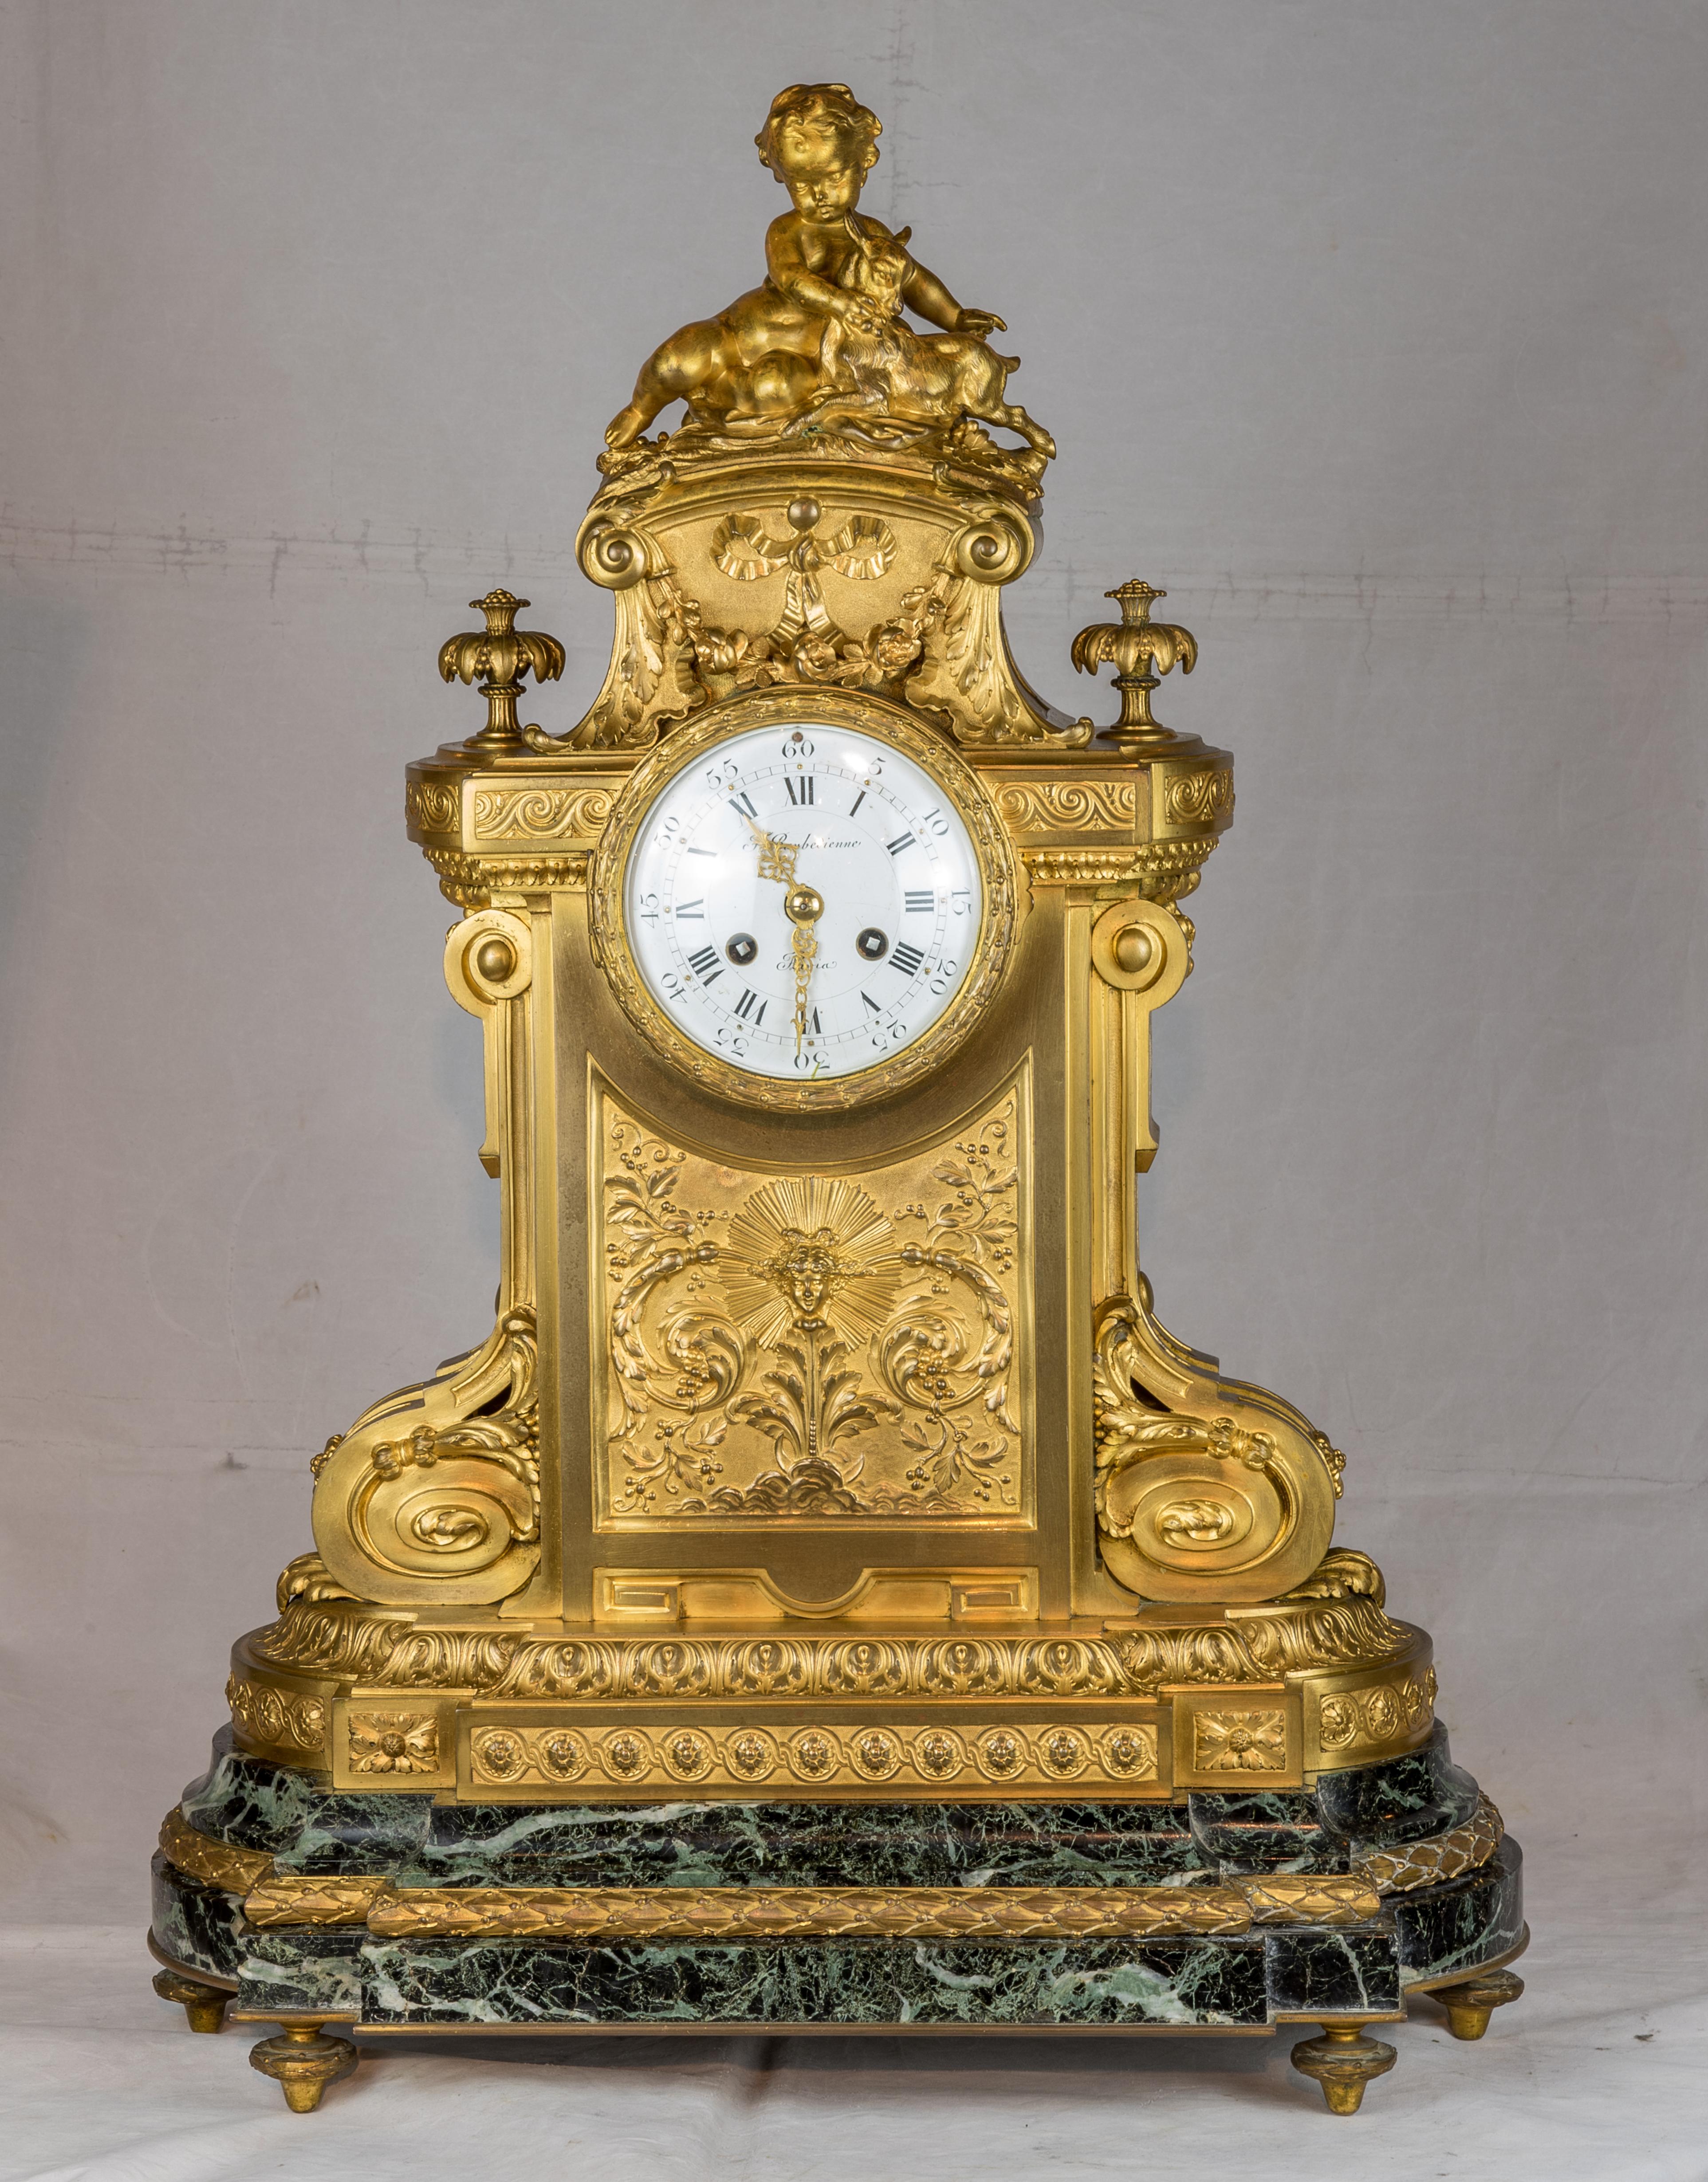 Surmounted on a French green marble, the clock with heavy dore bronze mounts. Marked on dial F. Barbedienne foundry. Accented with cherub & small goat atop, elaborate bronze decorative mounts throughout.

Origin: French
Date: 19th